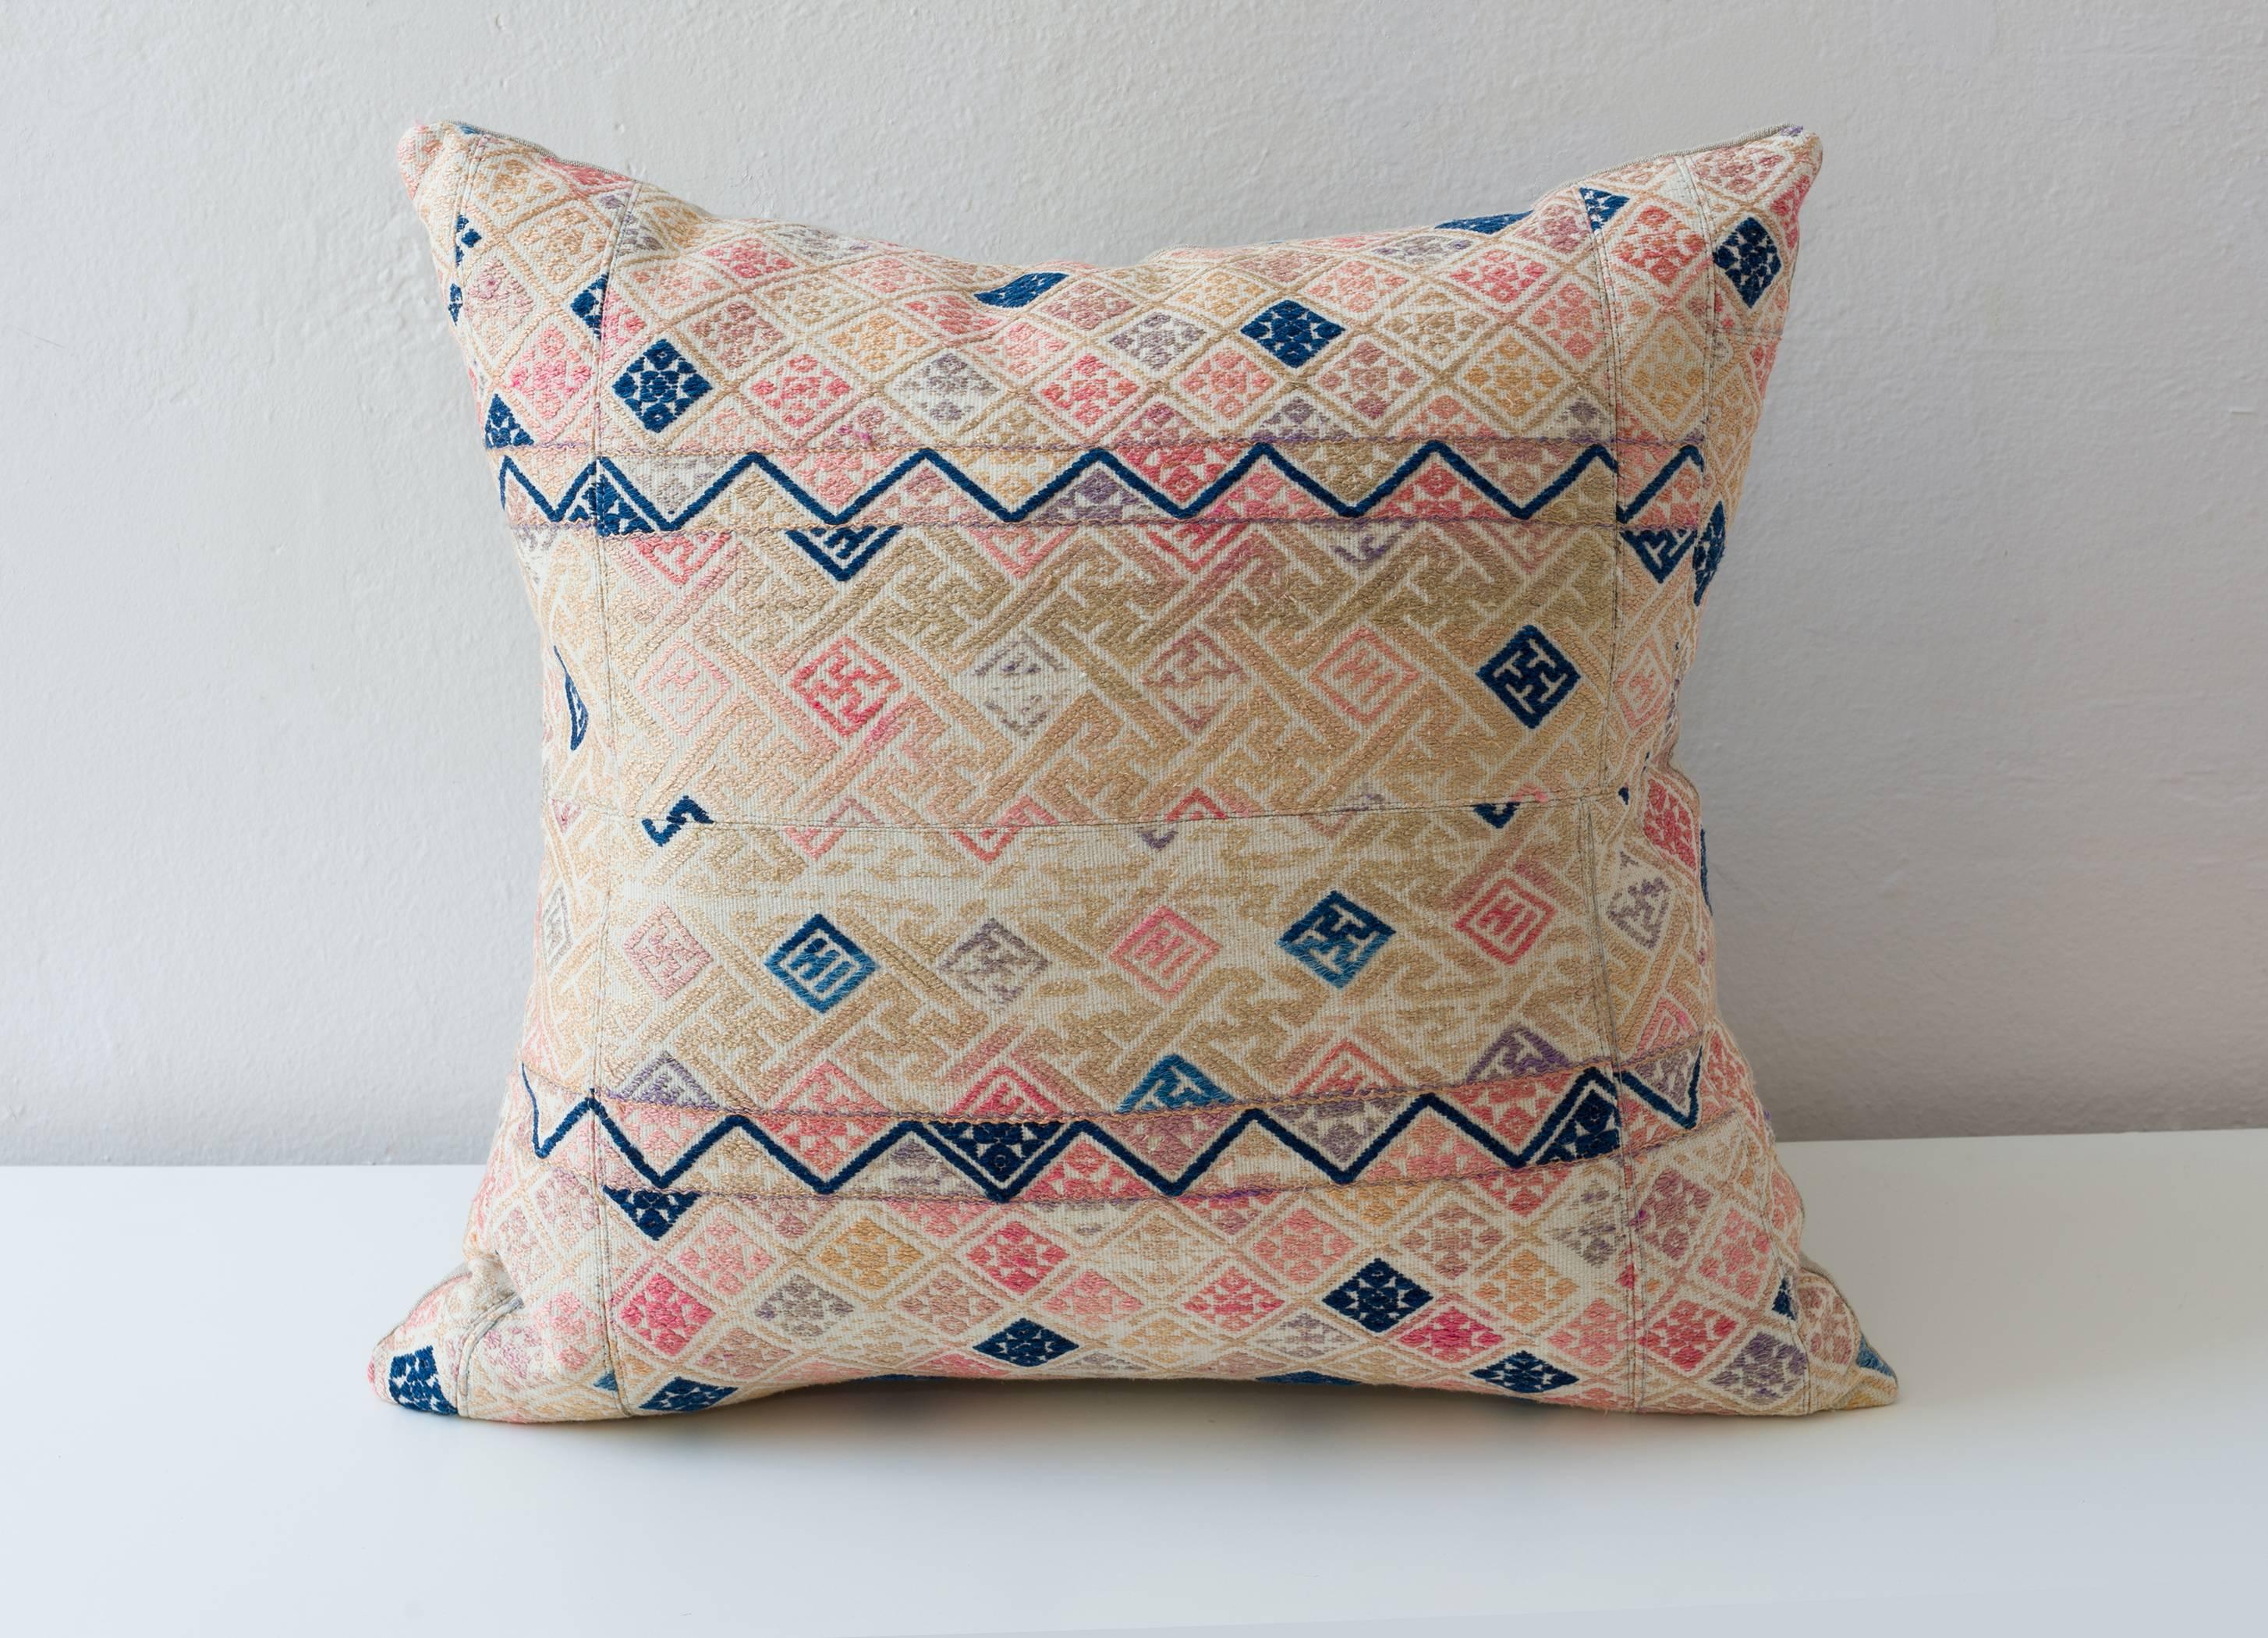 Zhuang piecework cushions in pinks with accents of indigo.

Linen on reverse see image
75/25 goose feather and down inserts.
Concealed zippers.
Please inquire for pillows in coordinating fabrics.